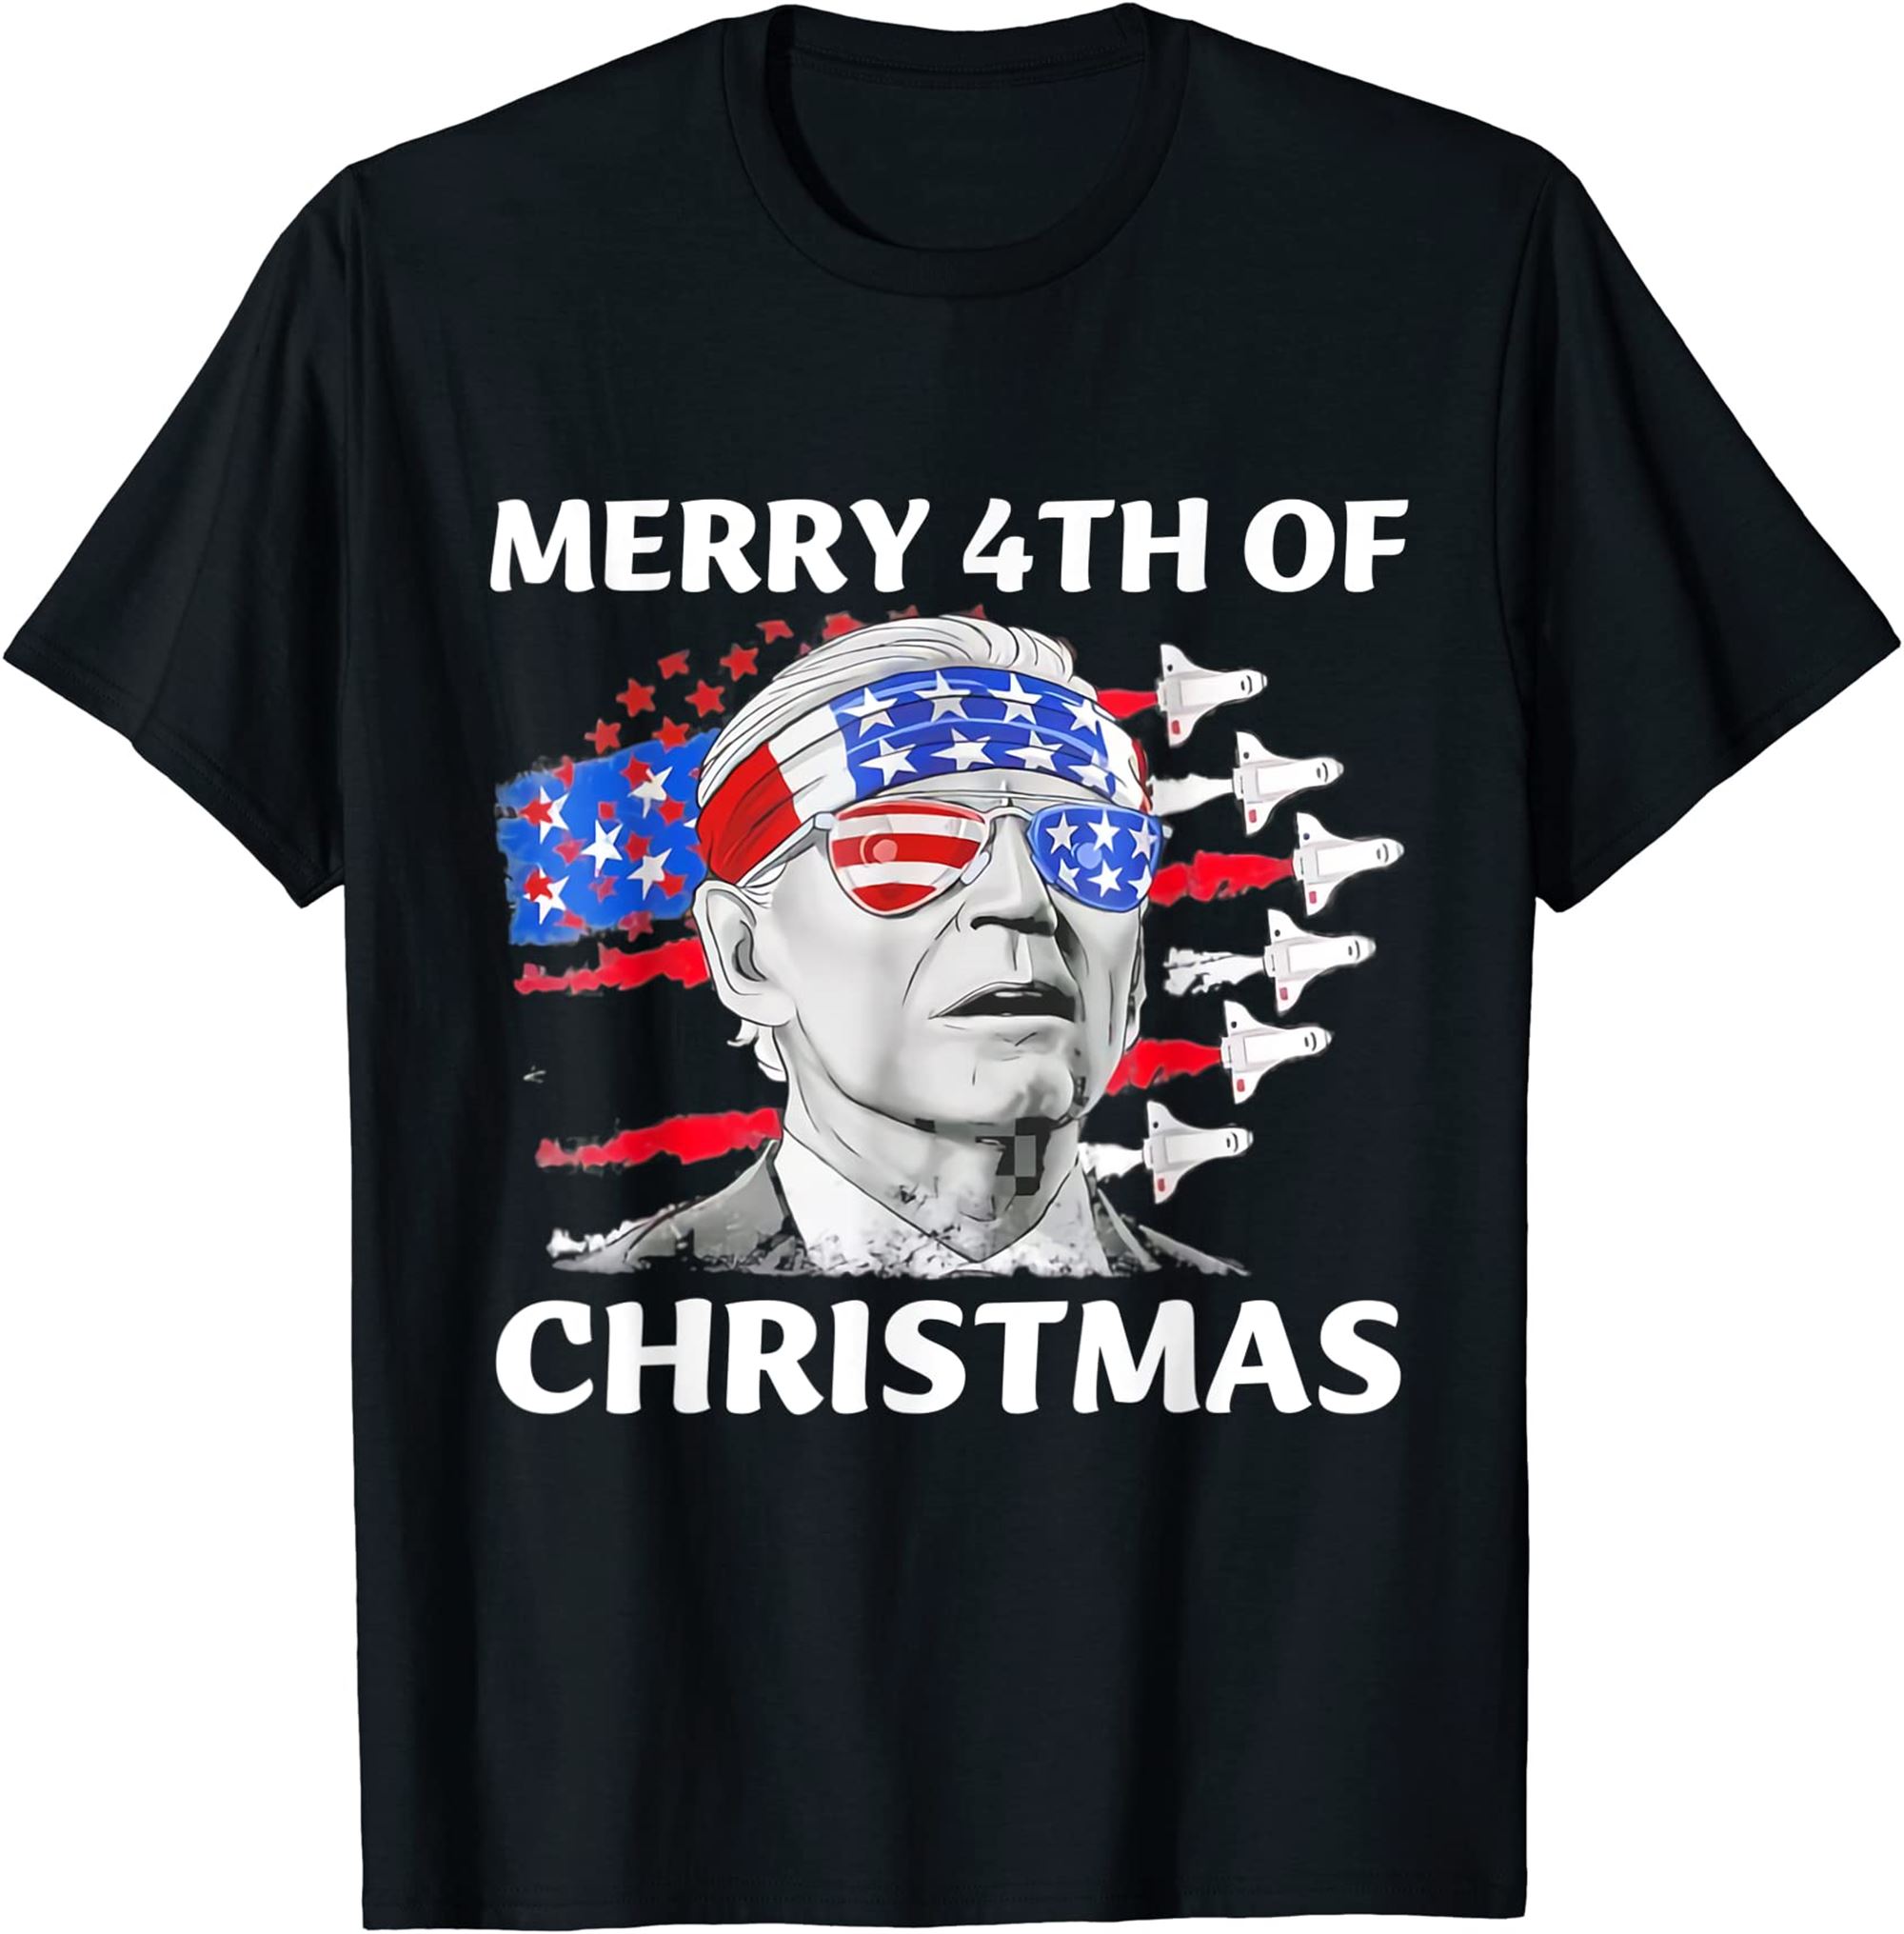 Funny Merry 4th Of Christmas Funny Biden 4th Of July T-shirt Full Size Up To 5xl